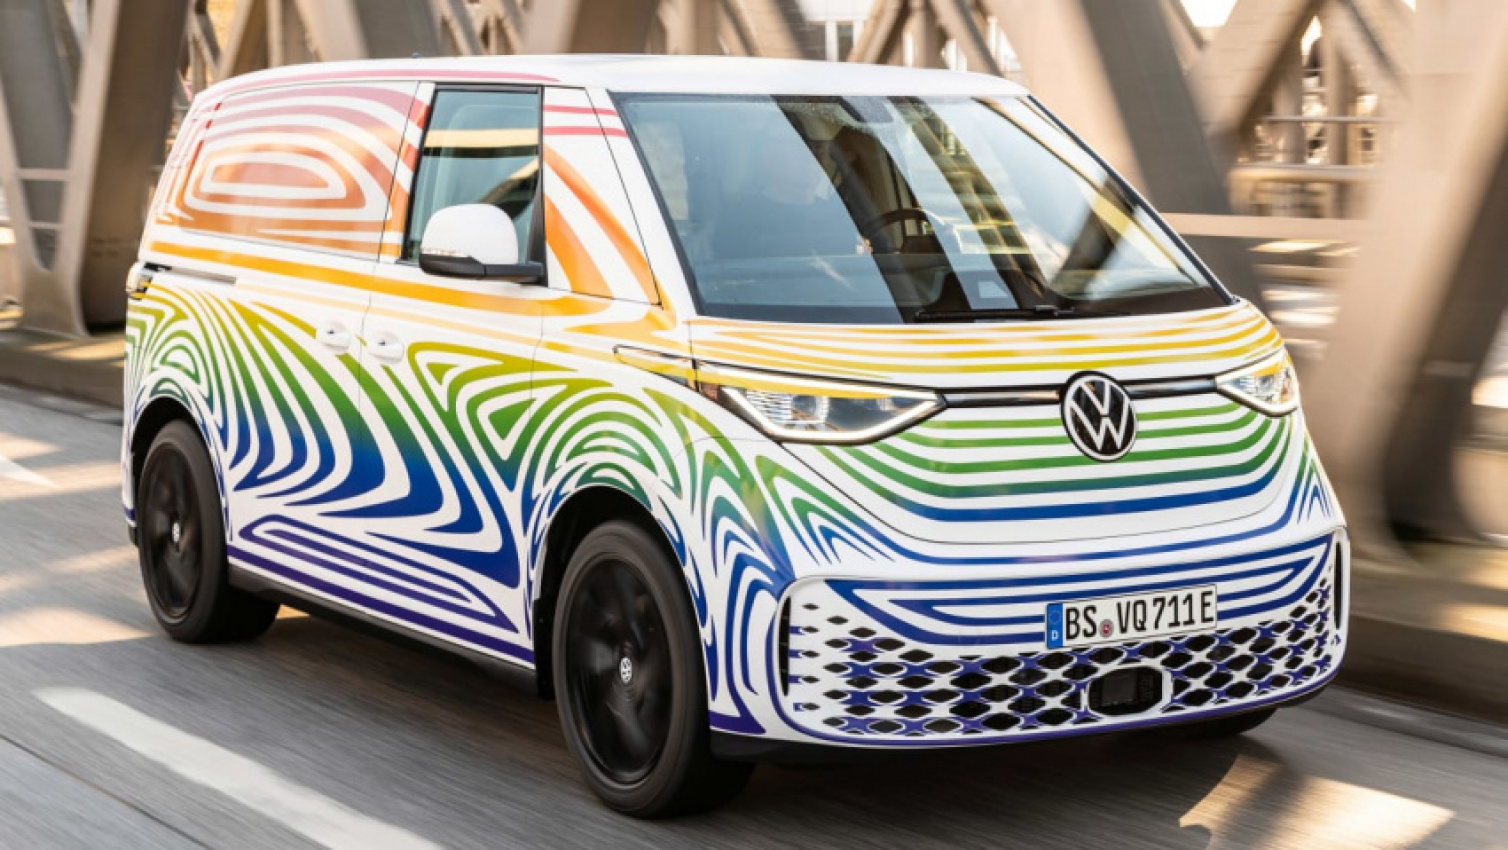 autos, cars, reviews, volkswagen, family cars, 2022 volkswagen id. buzz: prices, specs, release date and prototype drive